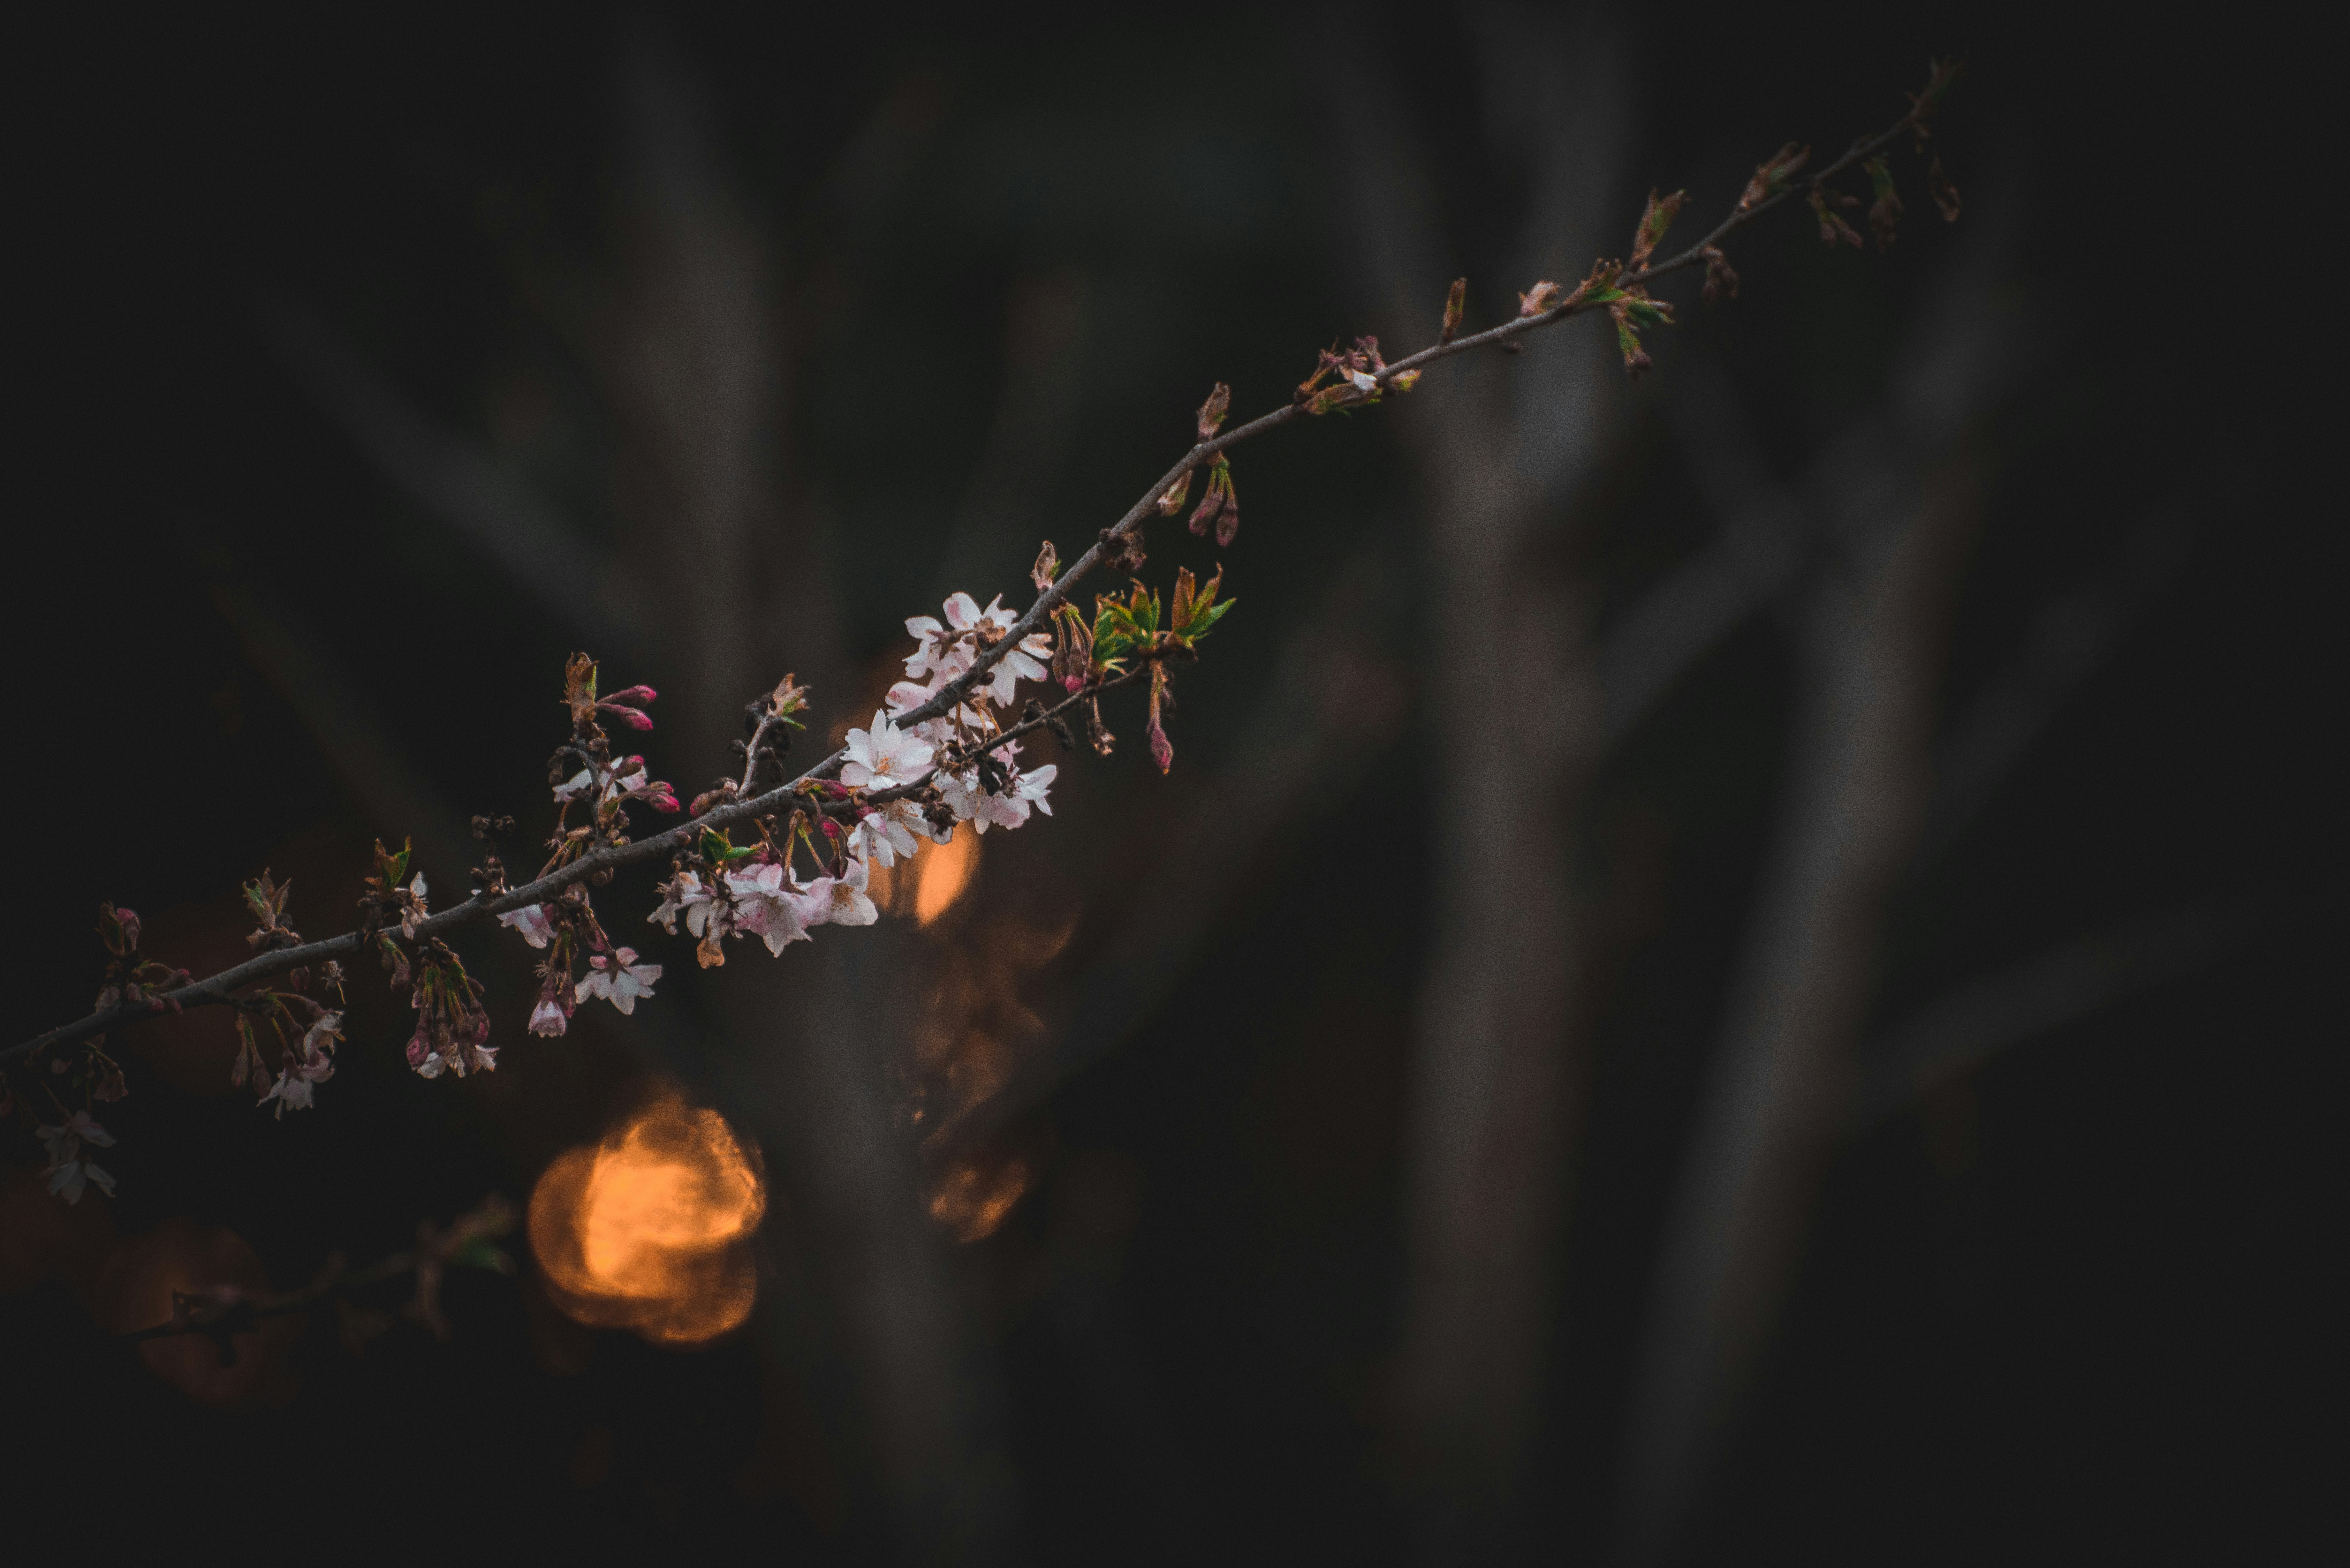 Choose from a curated selection of cherry blossom wallpapers for your mobile and desktop screens. Always free on Unsplash.